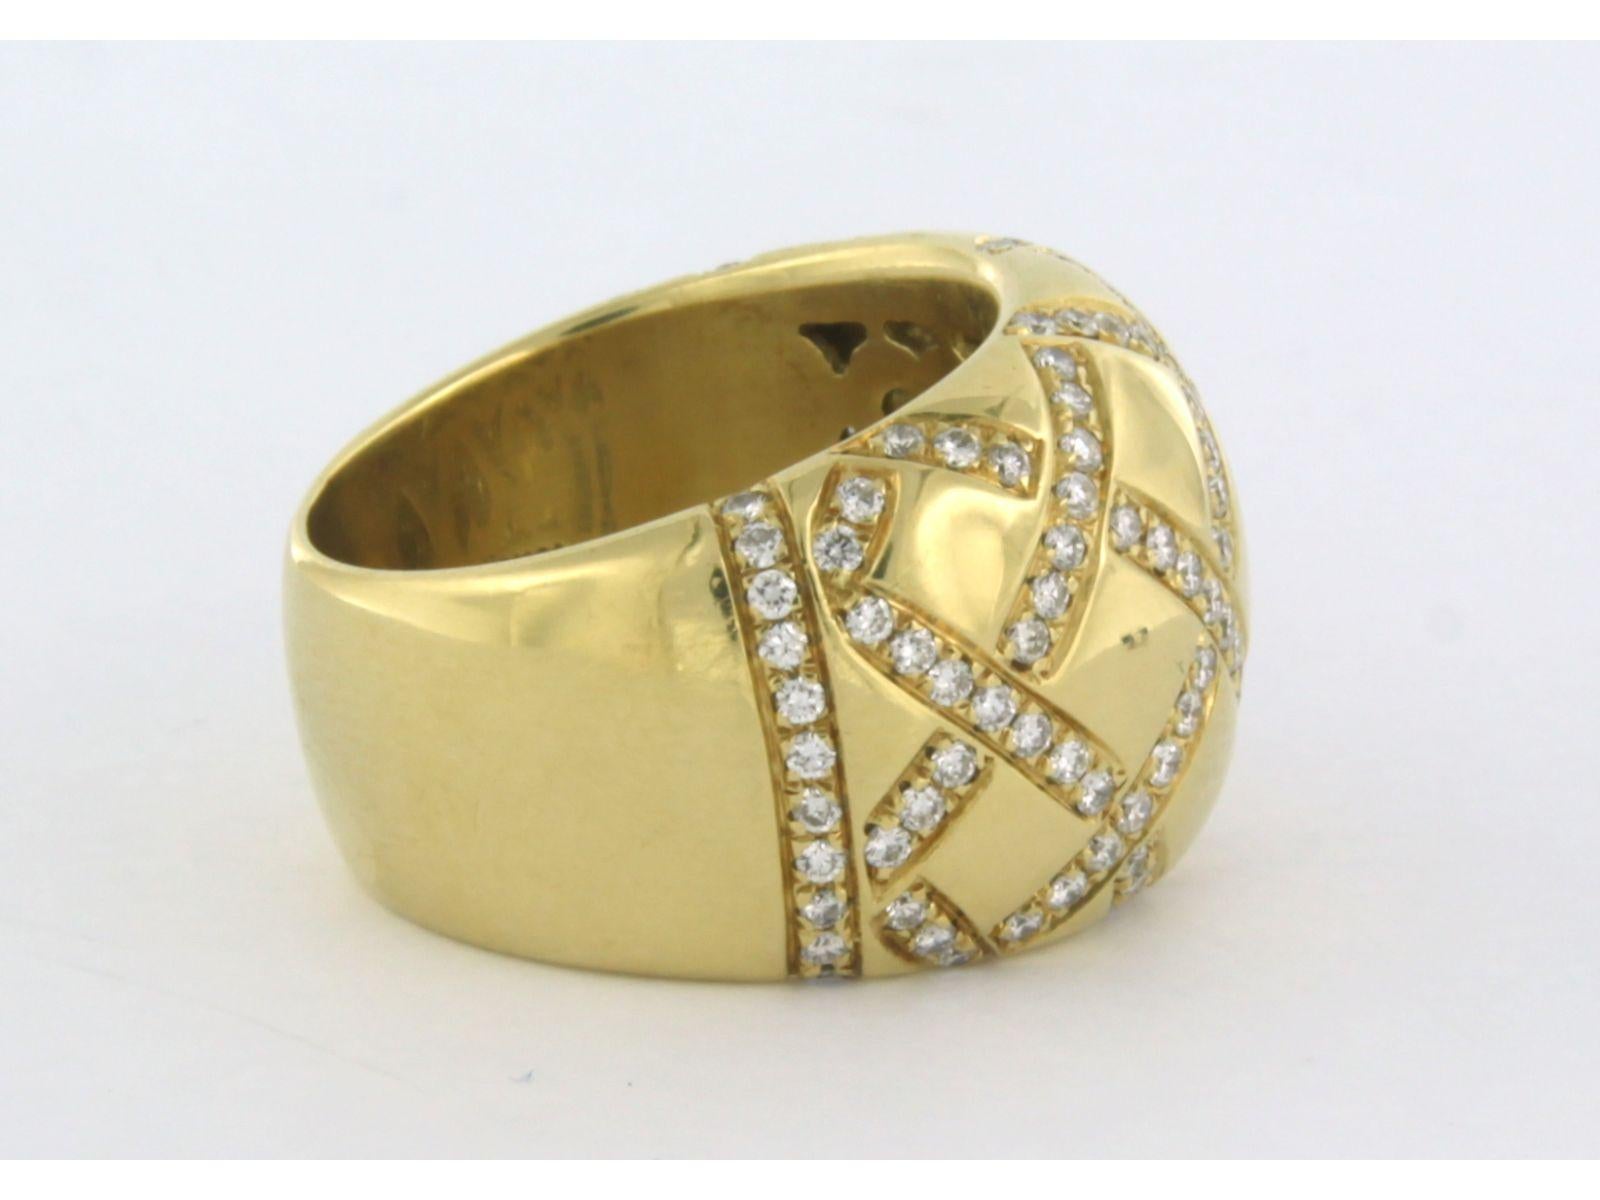 WEMPE - Ring with diamonds up to 1.38ct 18k yellow gold For Sale 1